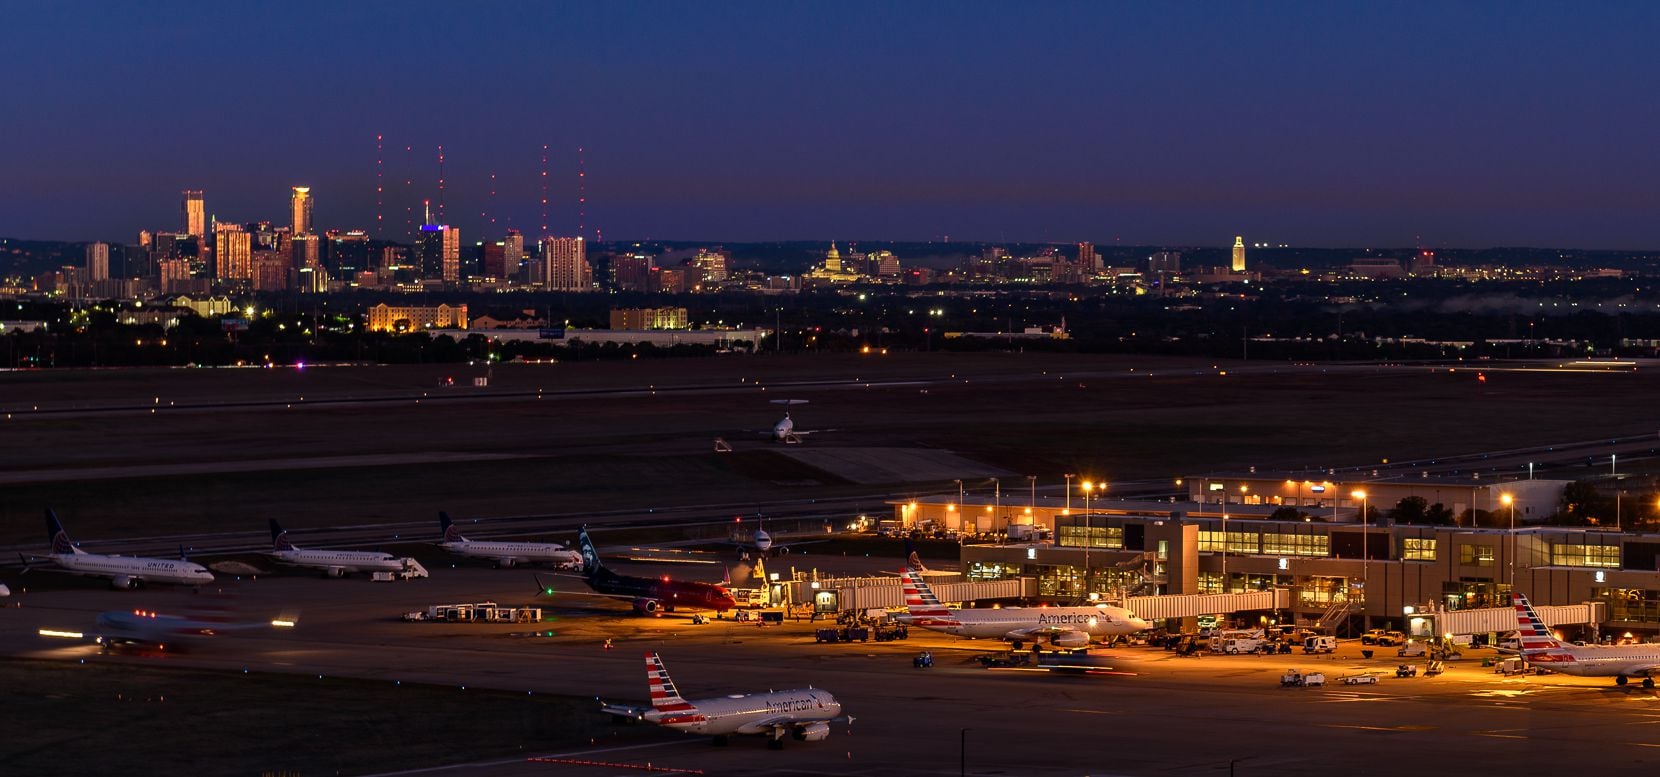 A nighttime view of Austin-Bergstrom International Airport with the city of Austin in the distance.Image downloaded from the airport's media images site.